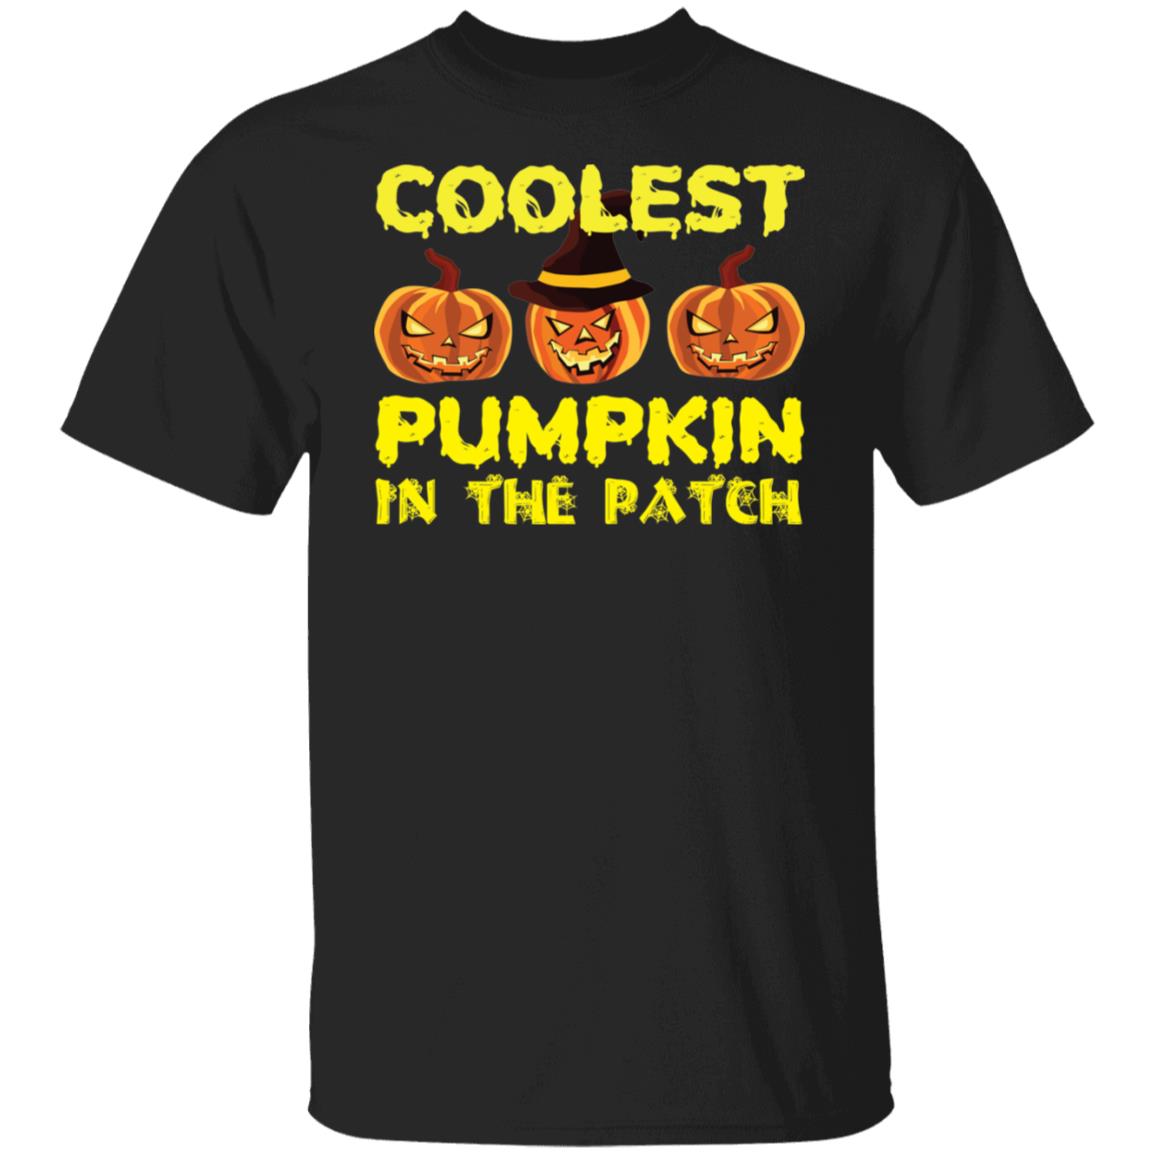 Coolest Pumpkin in The Patch Funny Halloween Gift Shirt